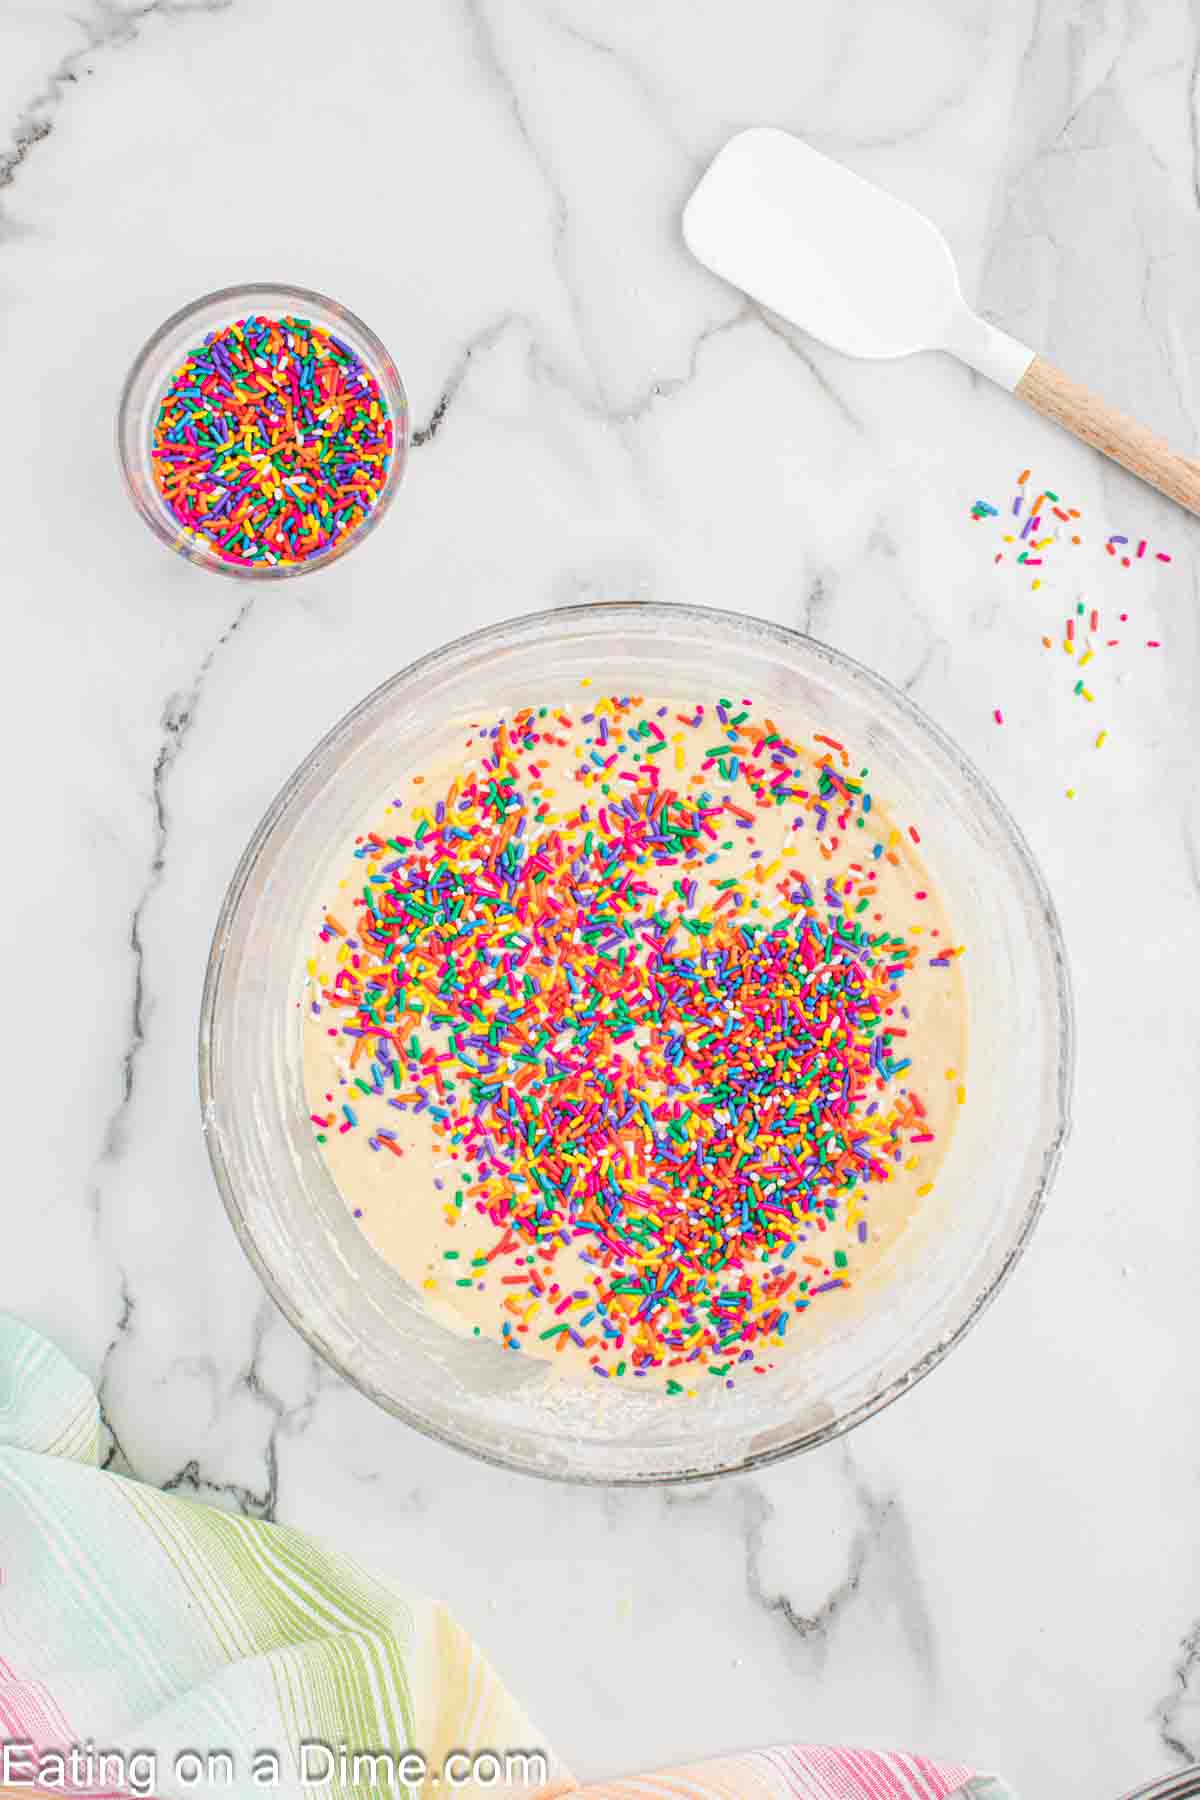 Mixing in sprinkles to the cake batter